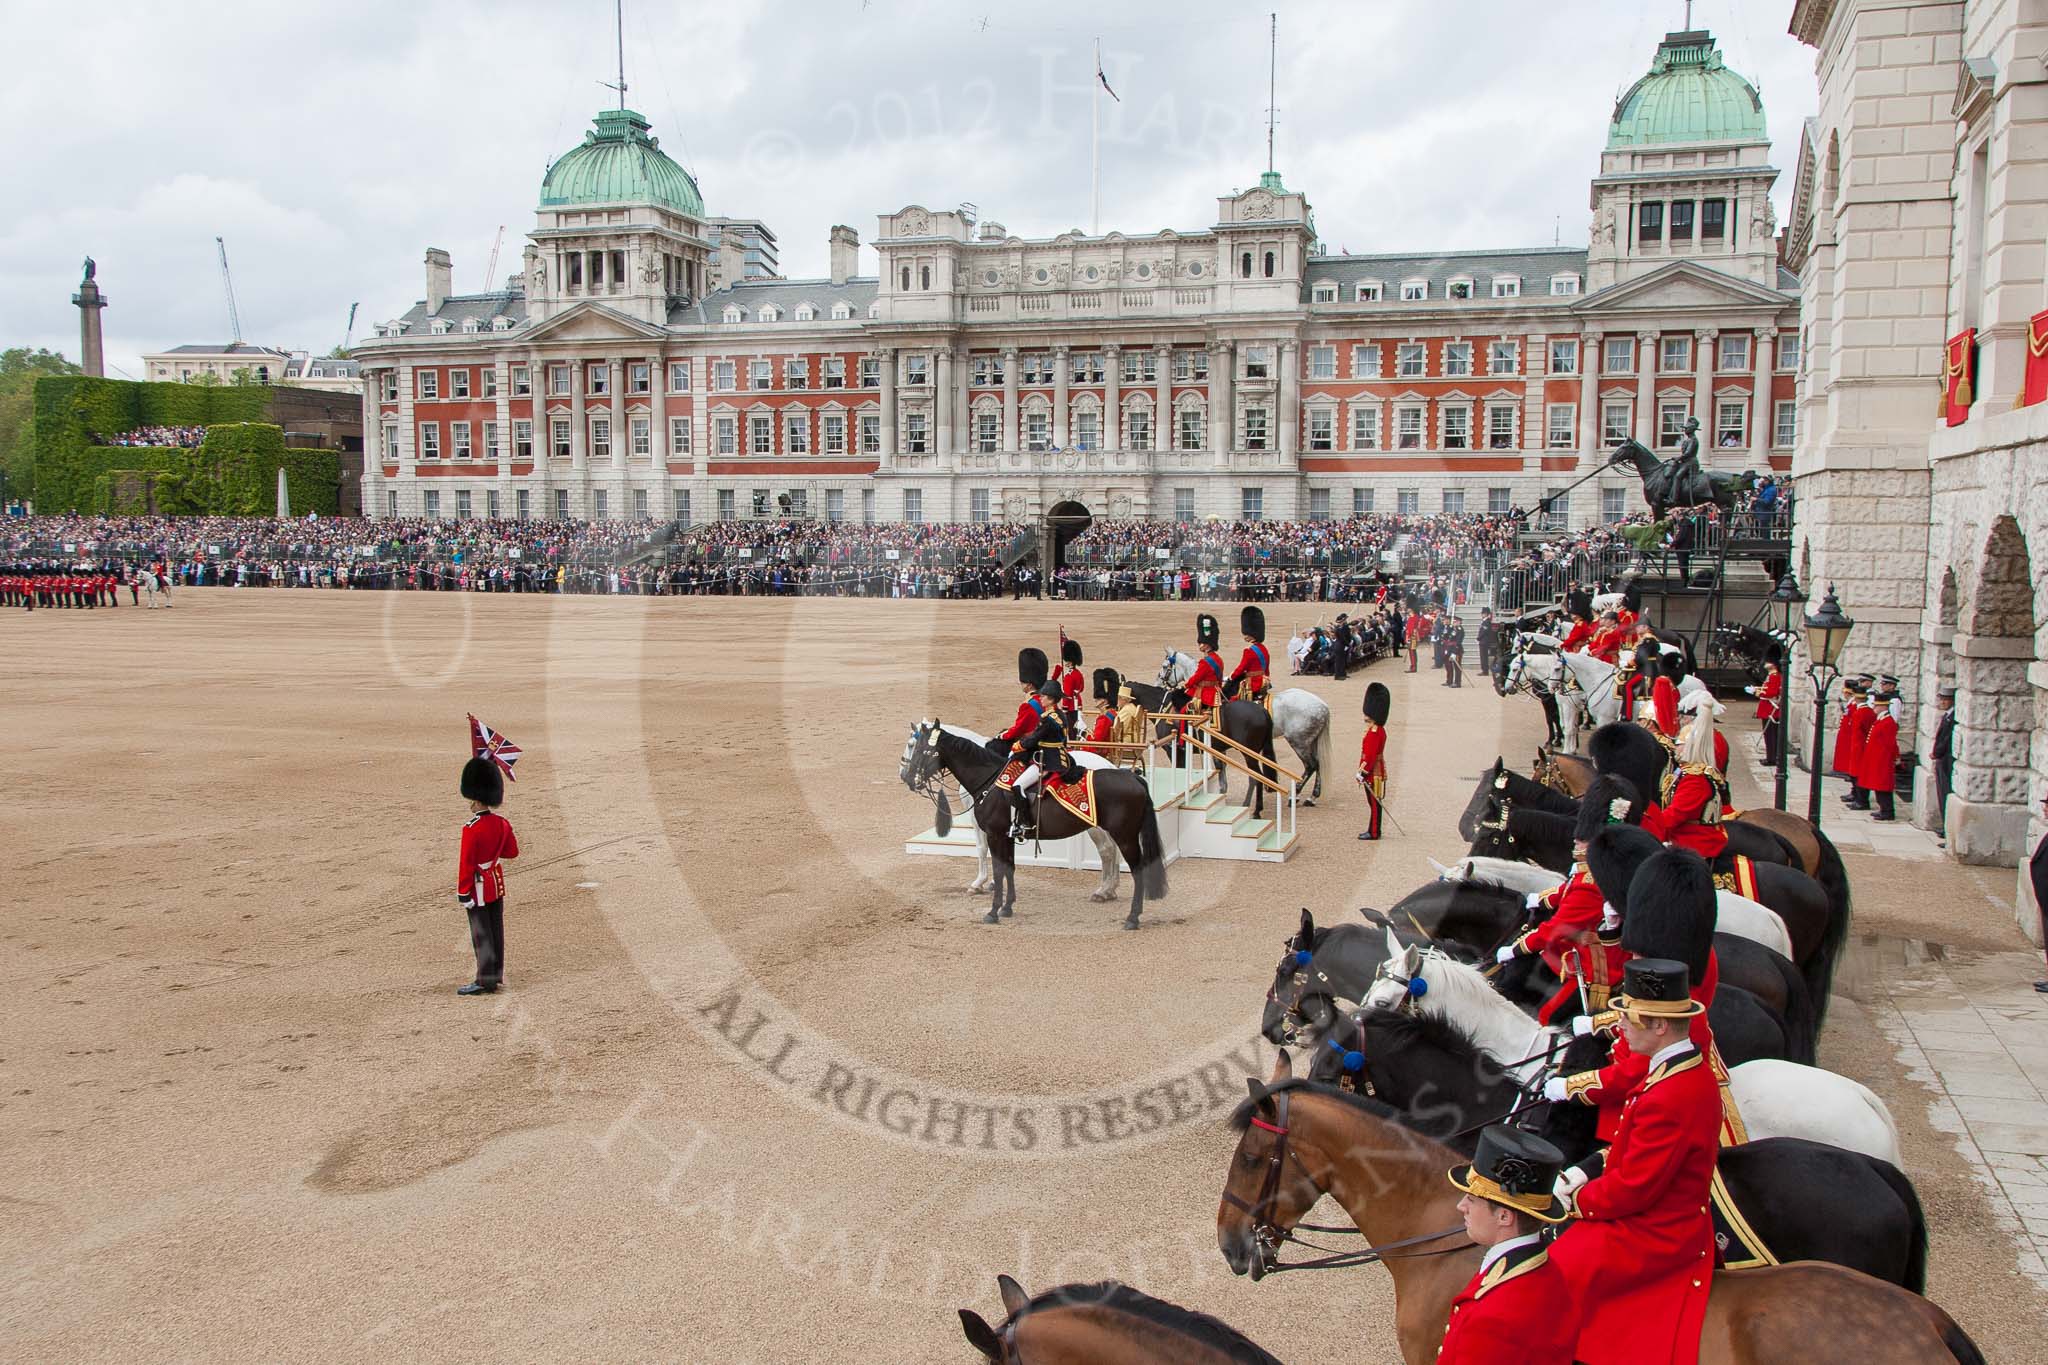 Trooping the Colour 2012: Horse Guards Parade whist the Colour is trooped. On the very right the window to the Major General's office. The spectators in front of the Ol Admirality Building are still standing. On the left of the image No. 6 Guard..
Horse Guards Parade, Westminster,
London SW1,

United Kingdom,
on 16 June 2012 at 11:28, image #357